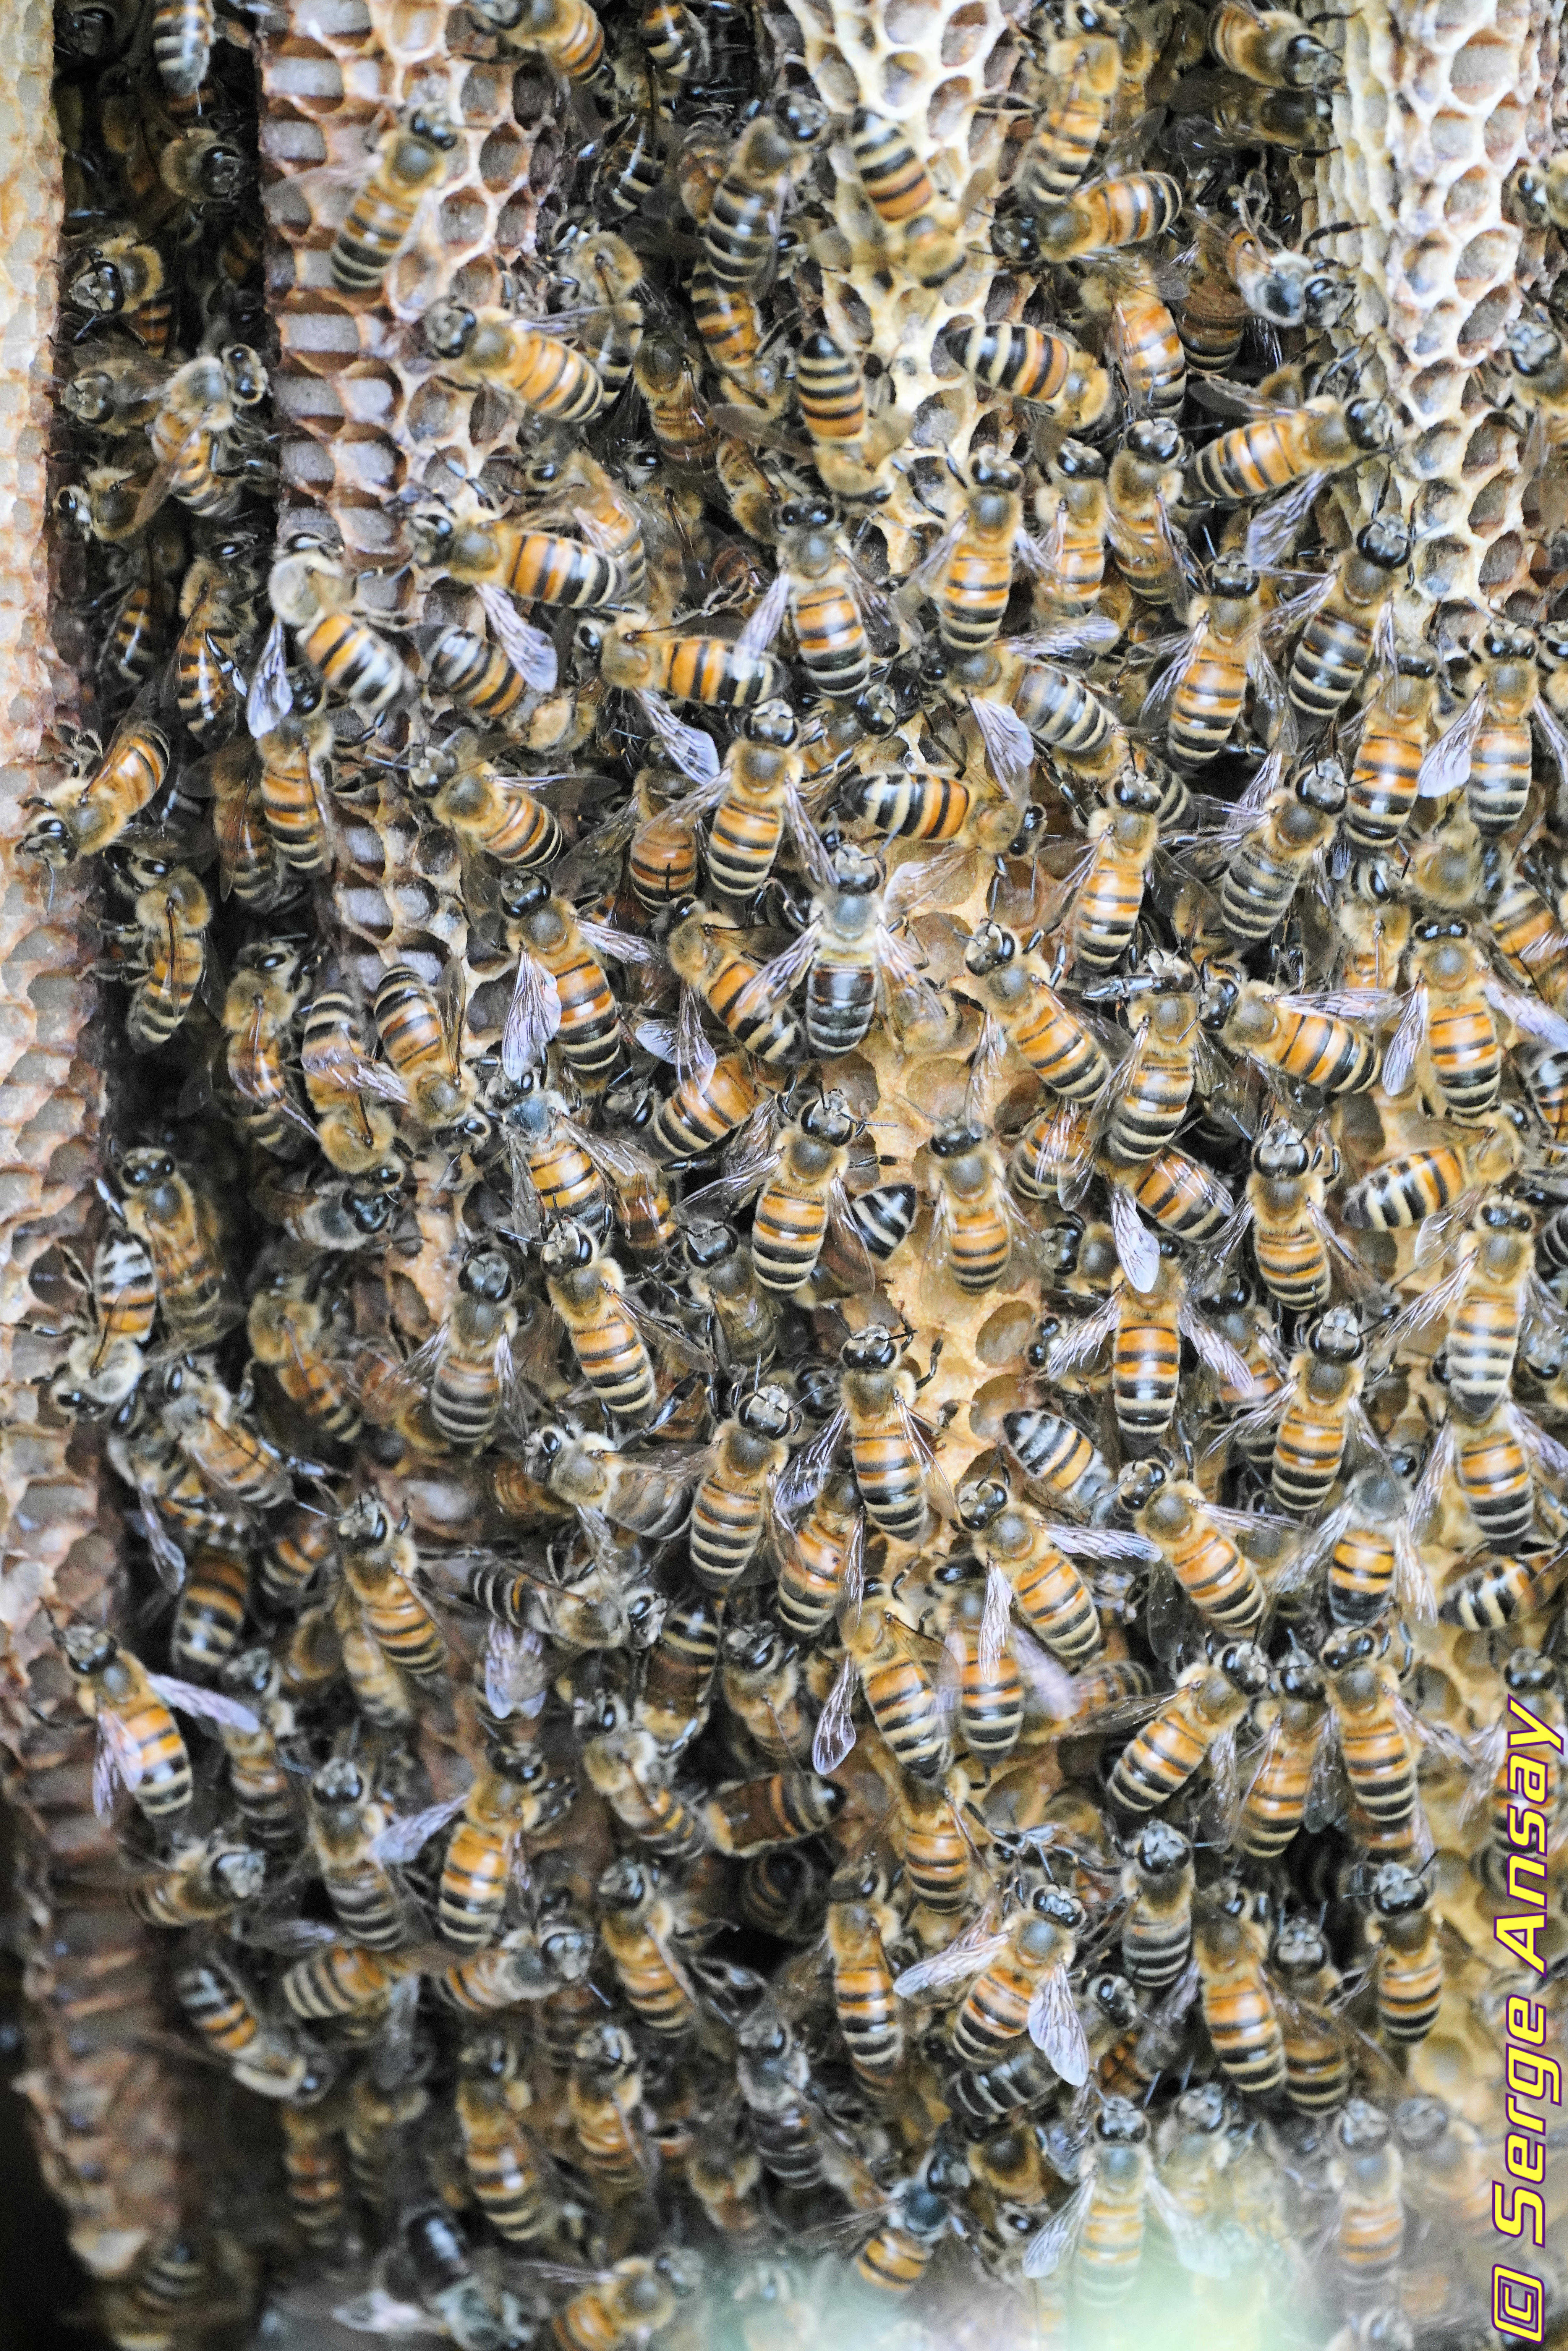 close-up picture of bees in wild nest